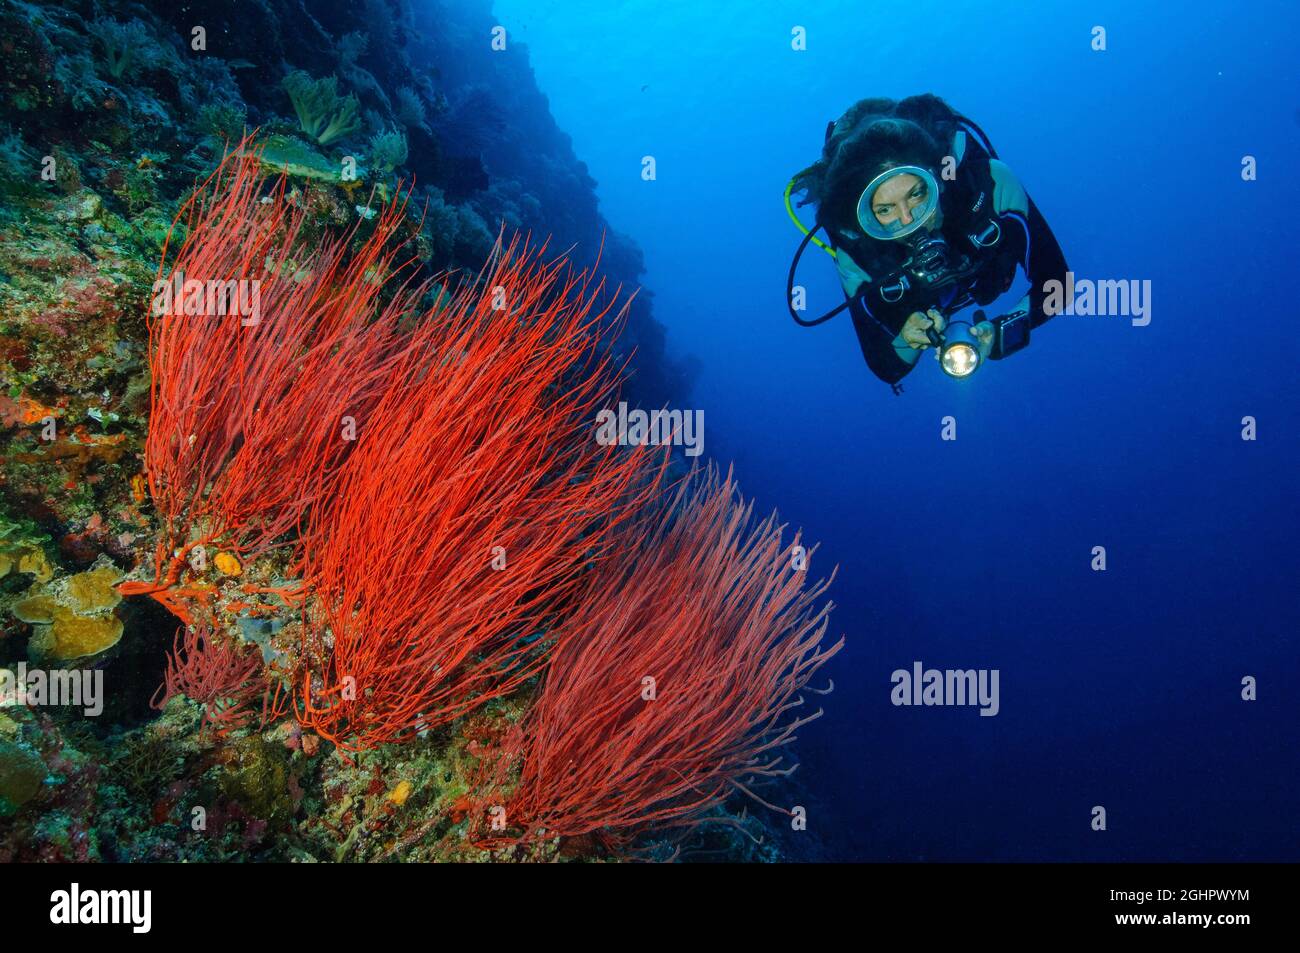 Diver looking at and illuminating Red whip coral (Ellisella ceratophyta), Pacific Ocean, Palau Stock Photo